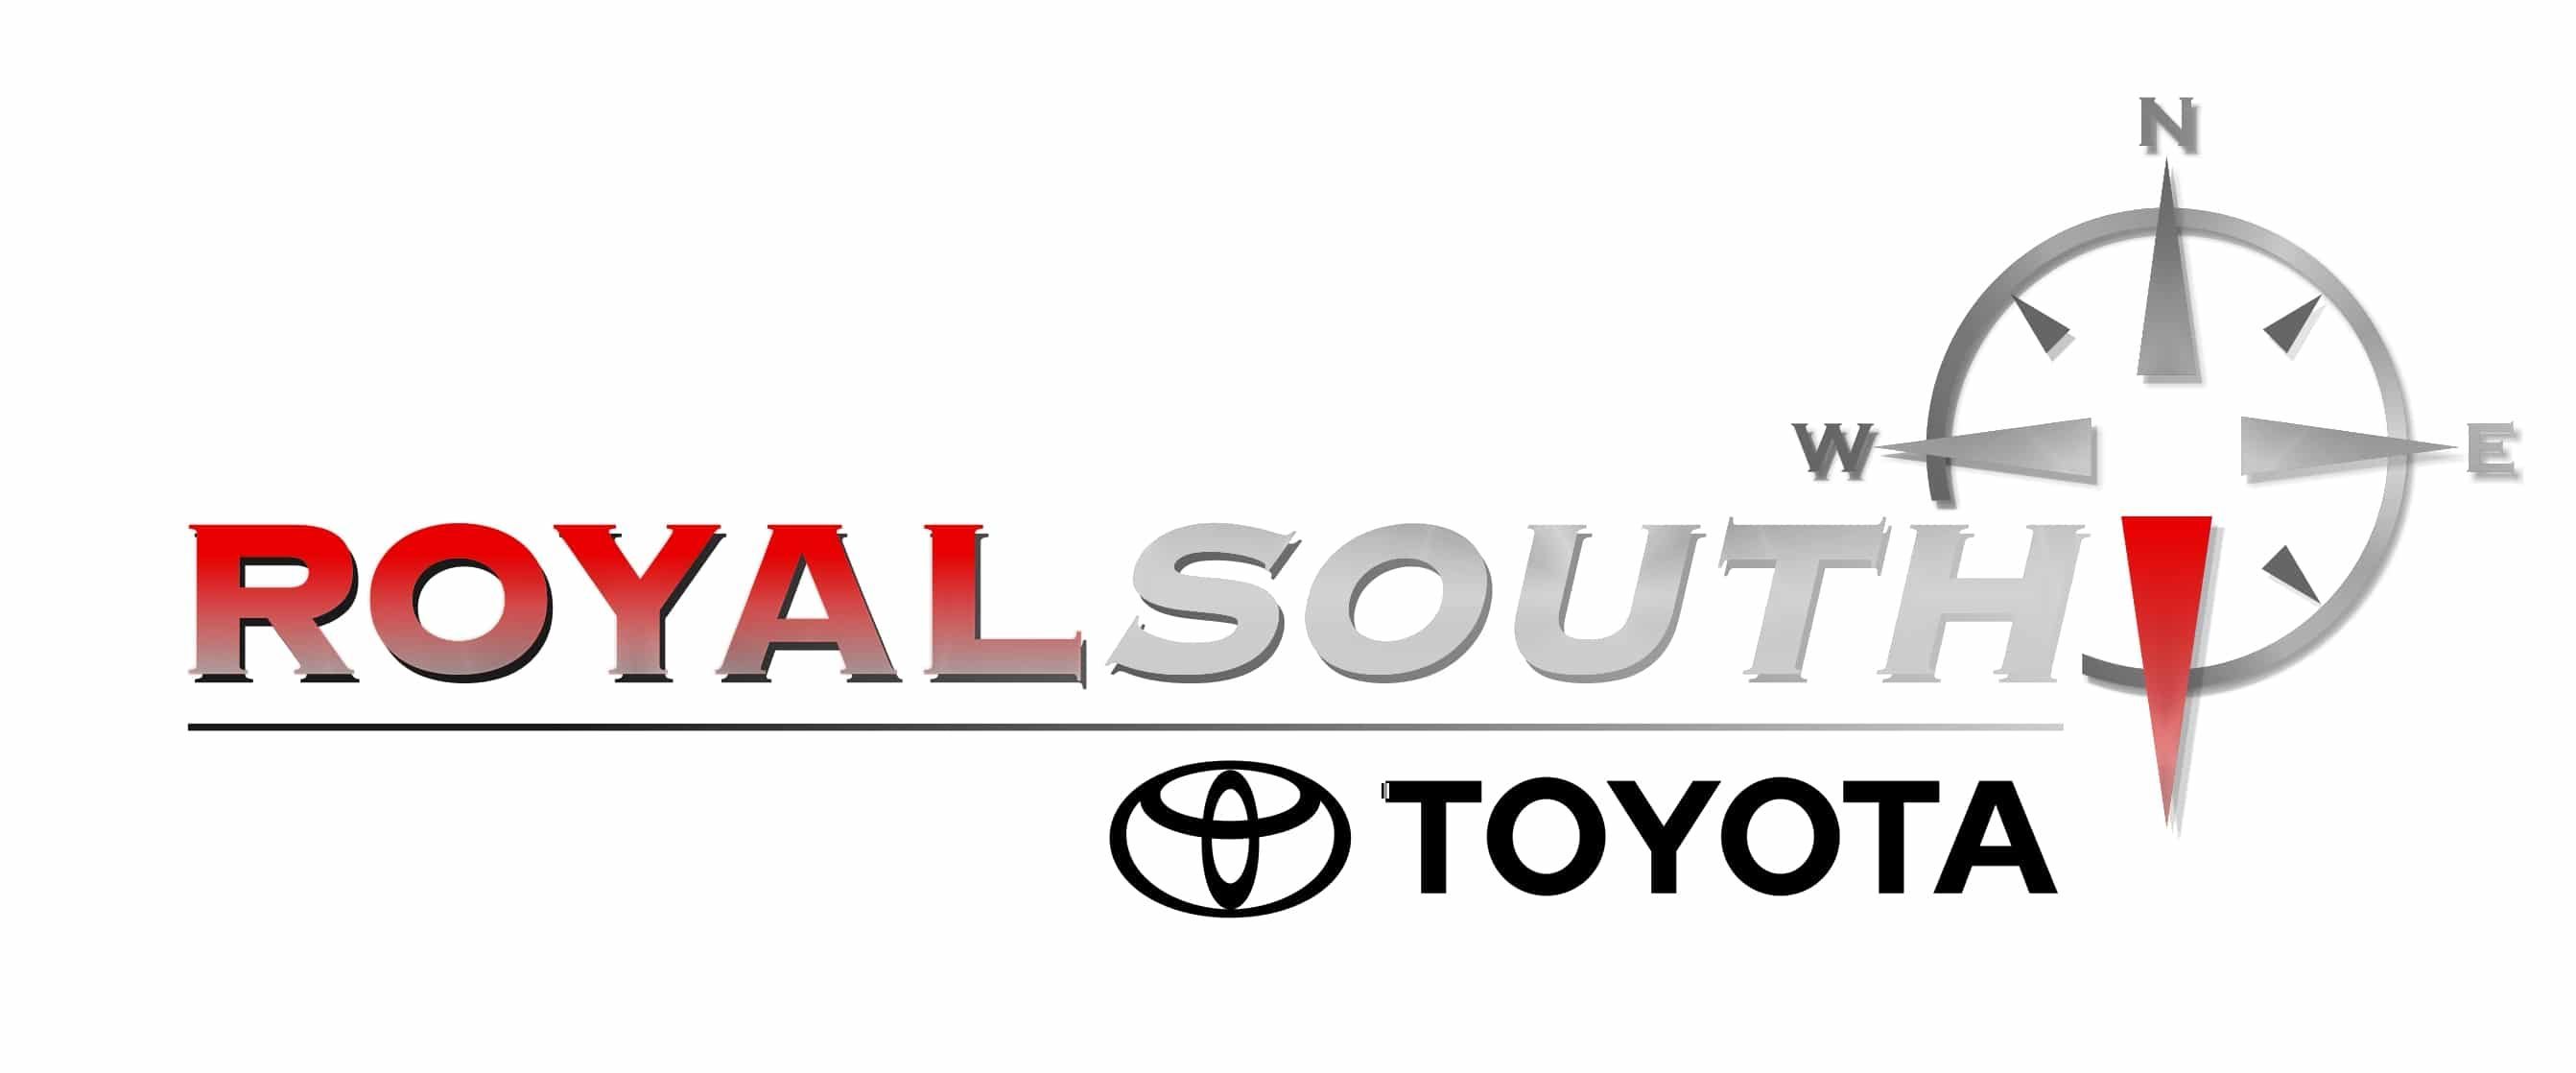 royal_south_toyota_right-justified_stylized (2)